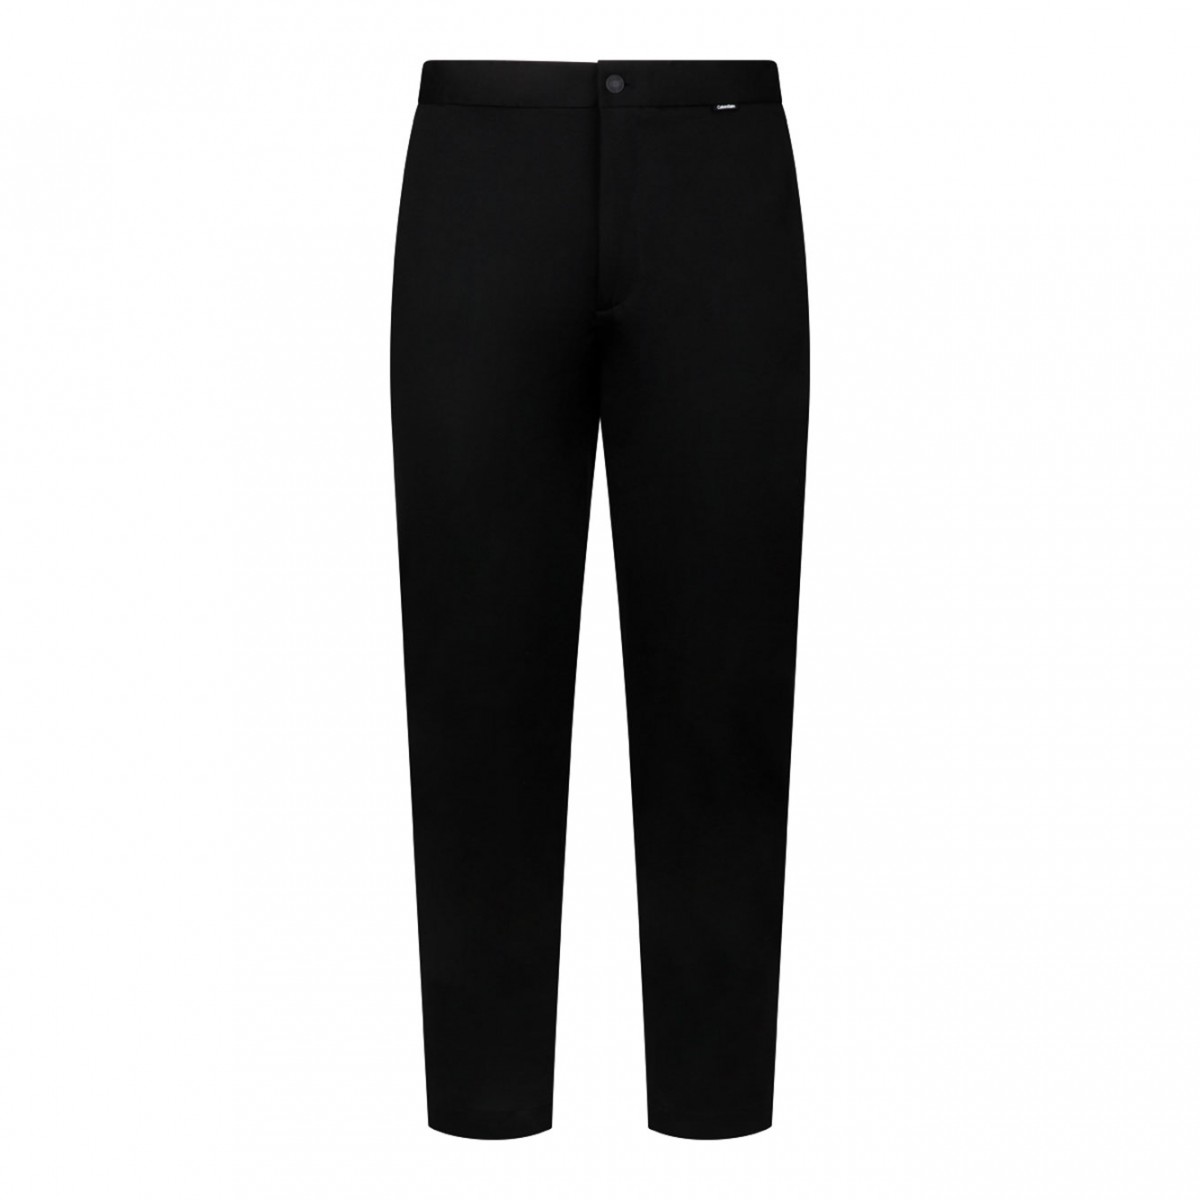 Black Tapered Knit Trousers